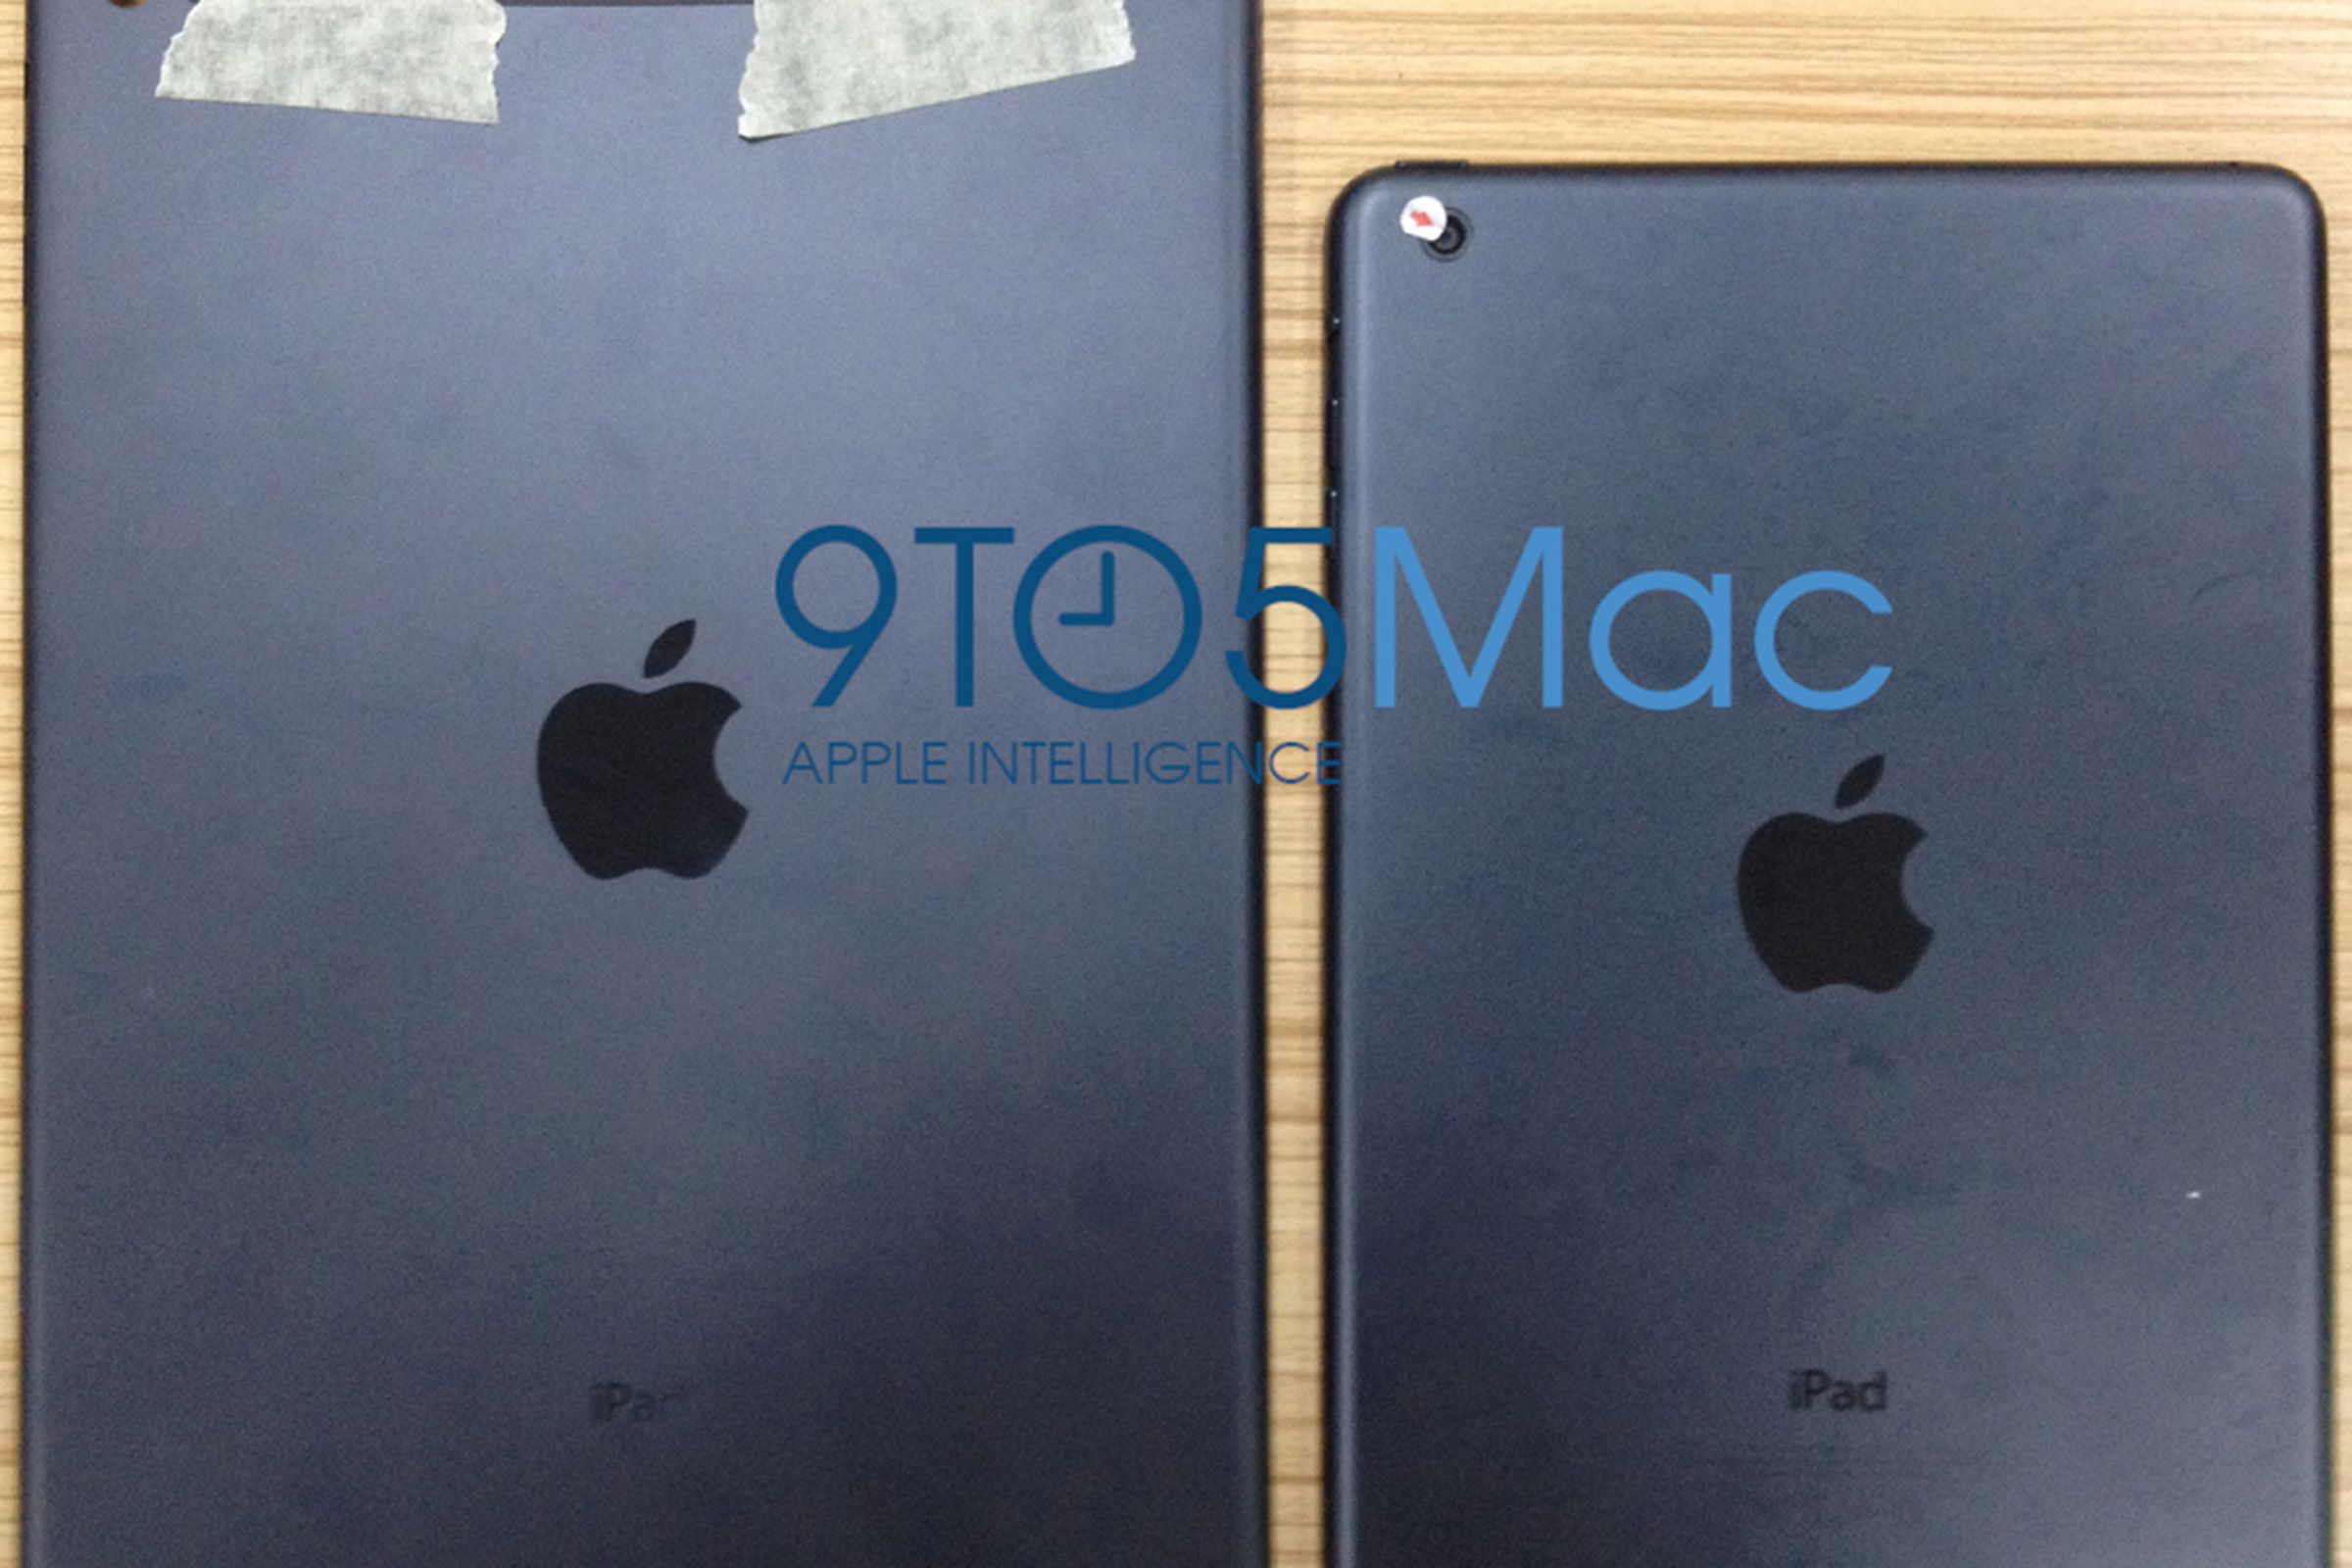 New iPad potentially leaked 9to5Mac